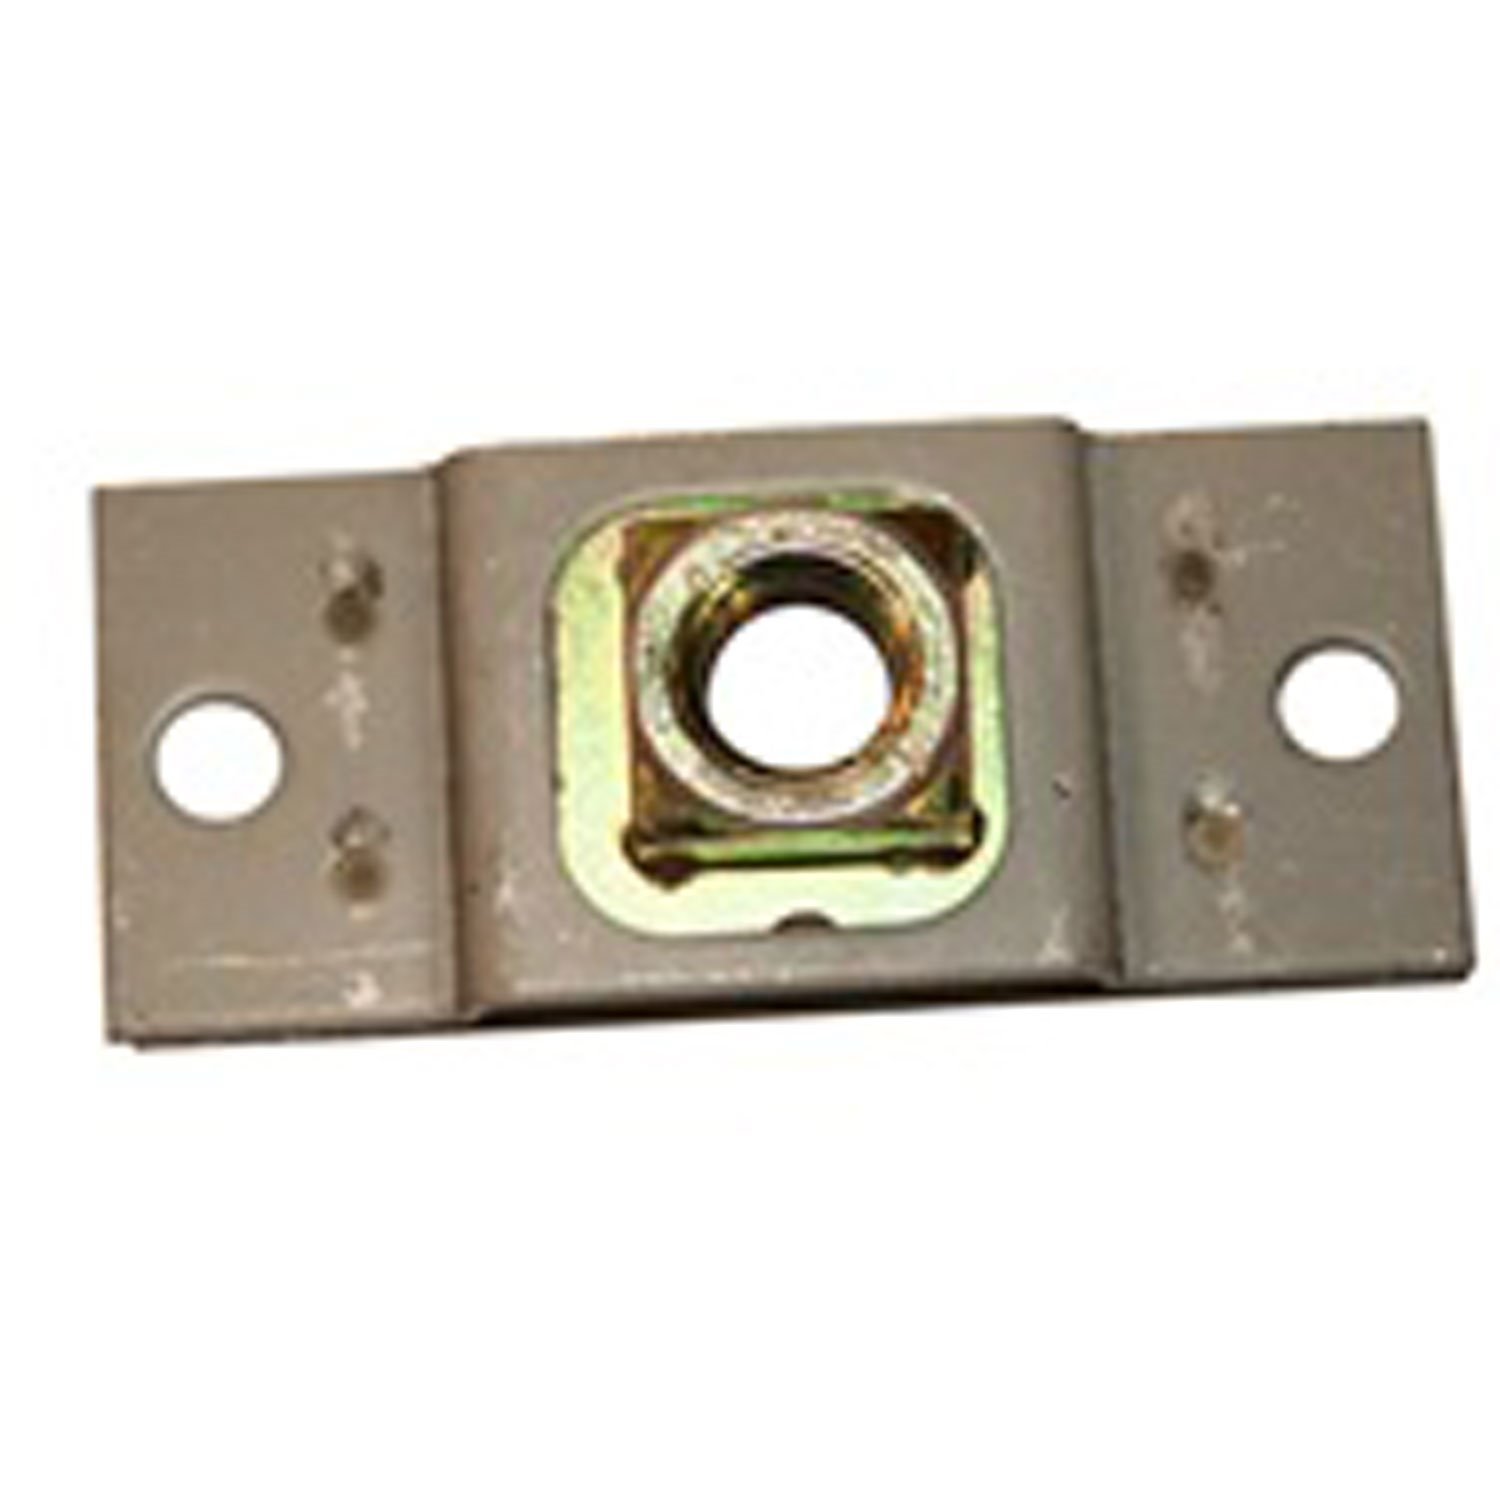 This door latch striker plate from Omix-ADA fits